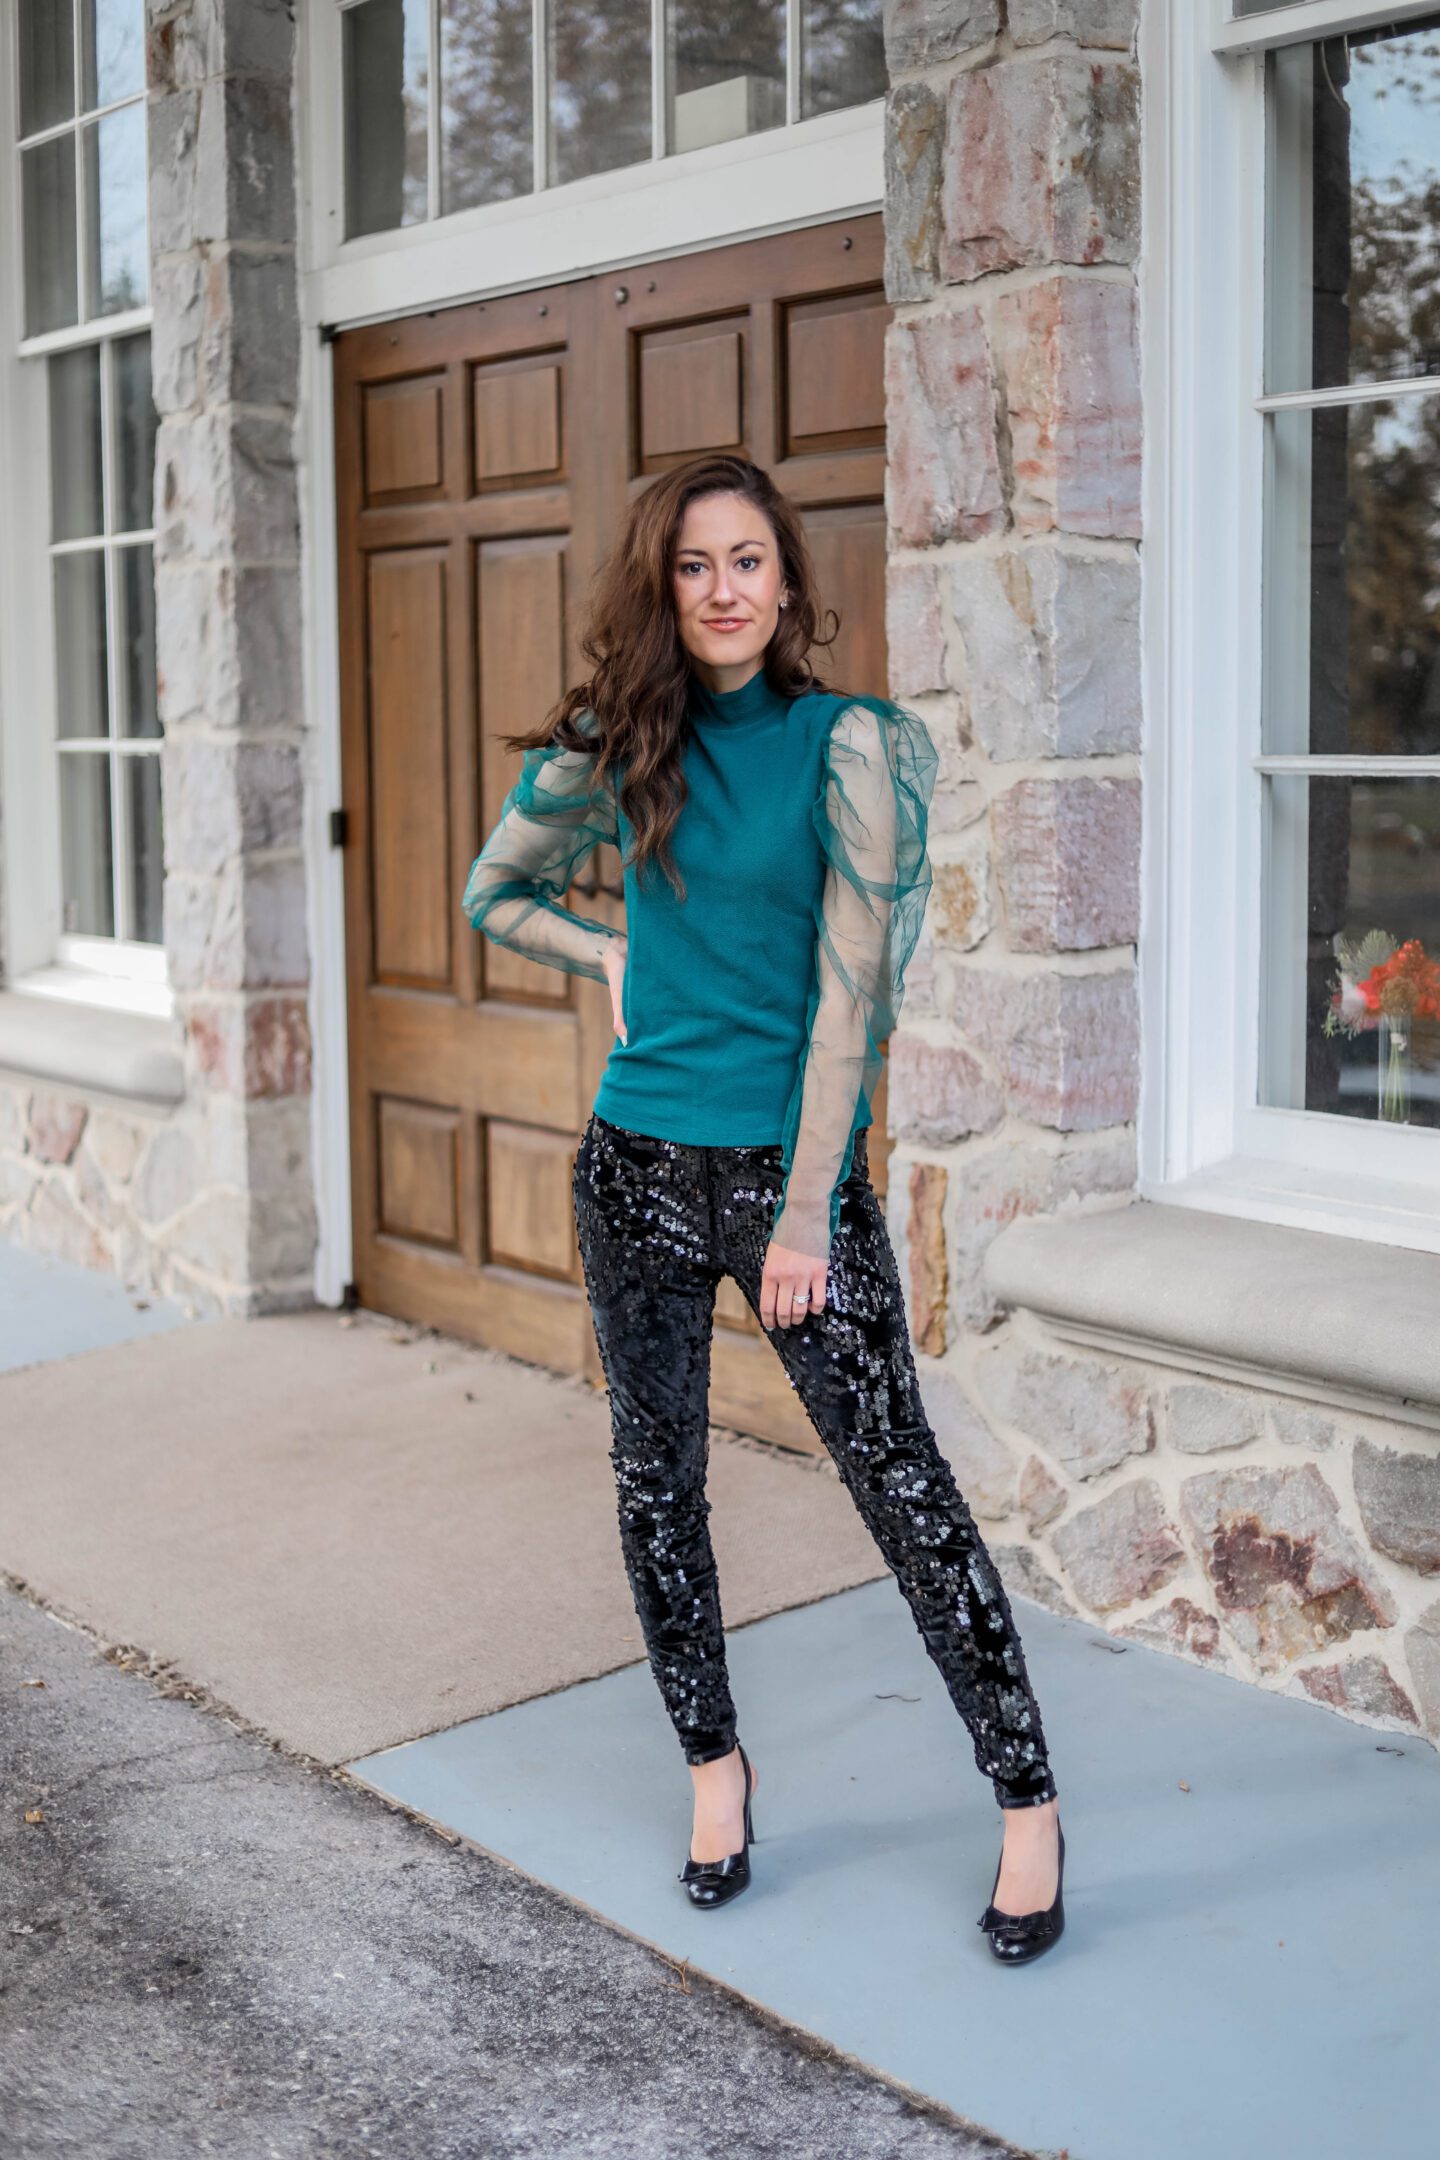 Holiday Party Outfit: $20 AMAZON TOP + SEQUIN LEGGINGS